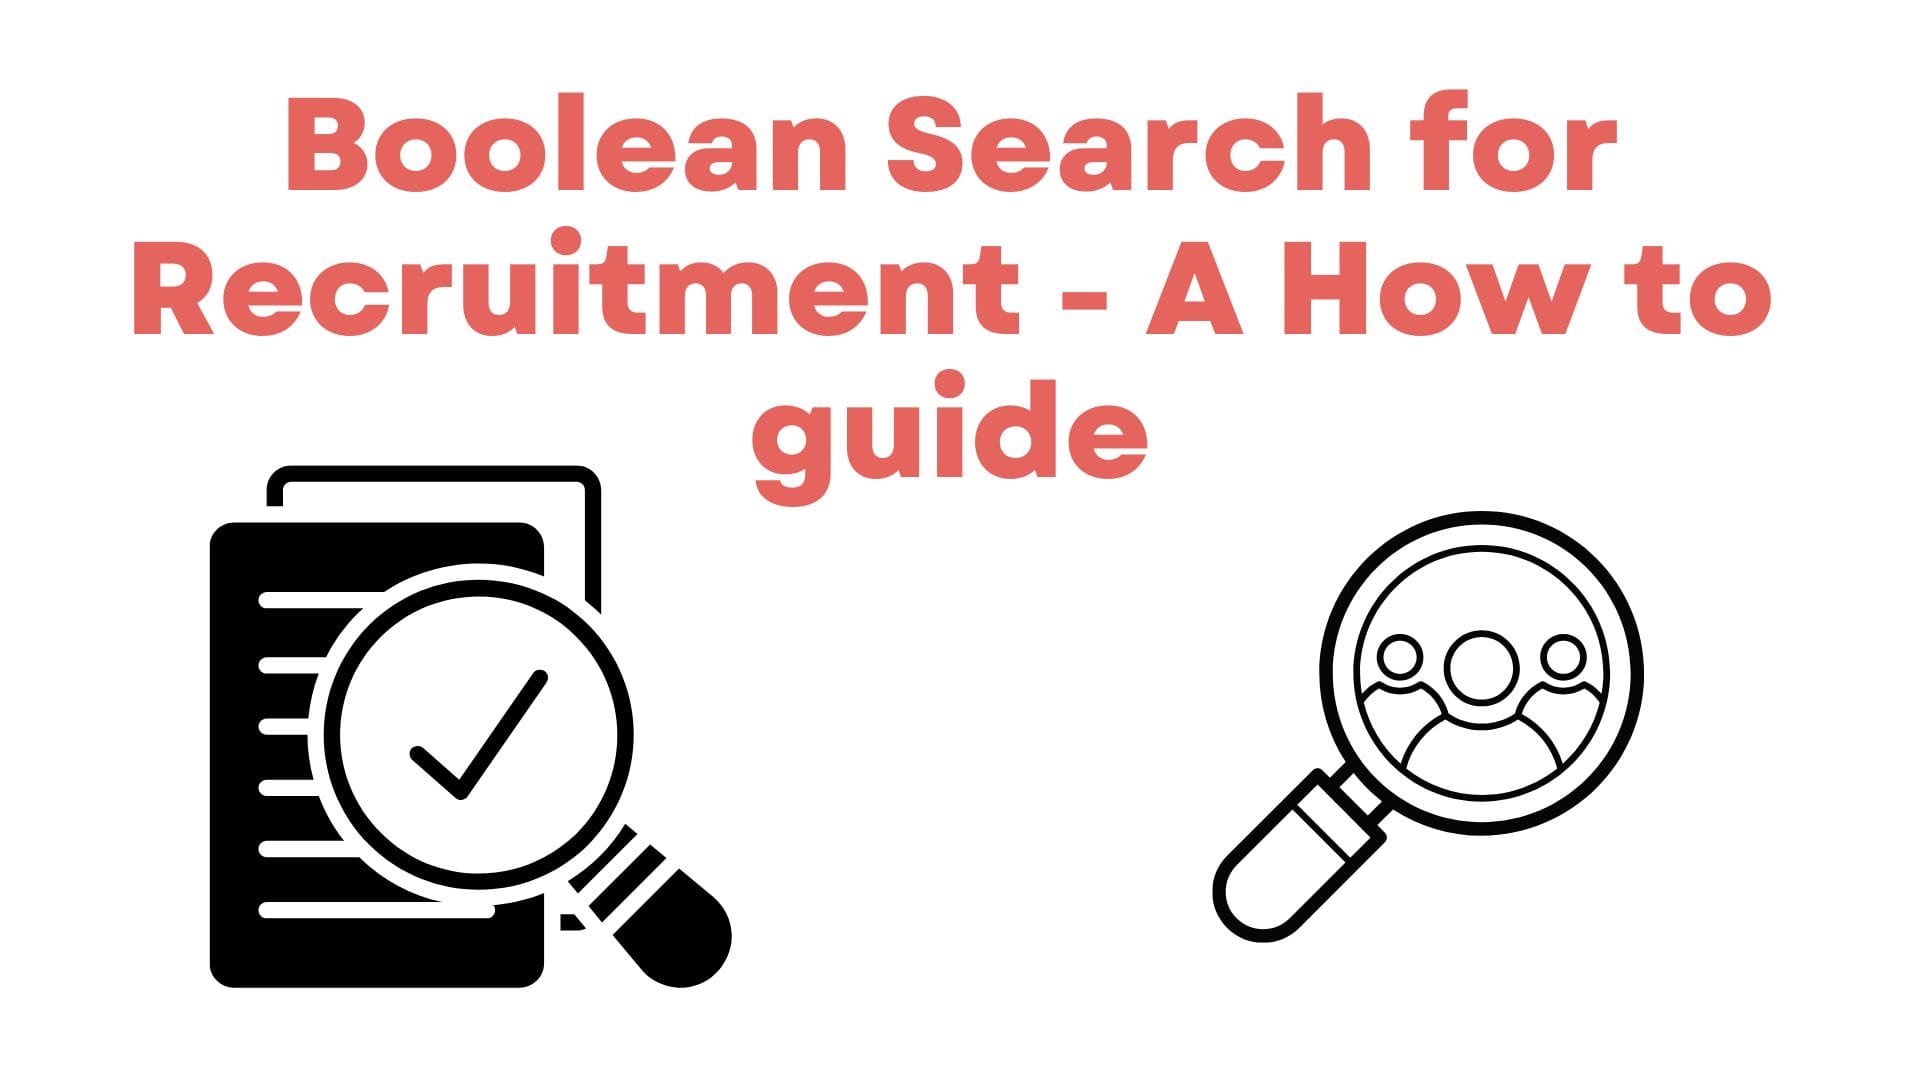 Boolean Search for Recruitment - A How to guide